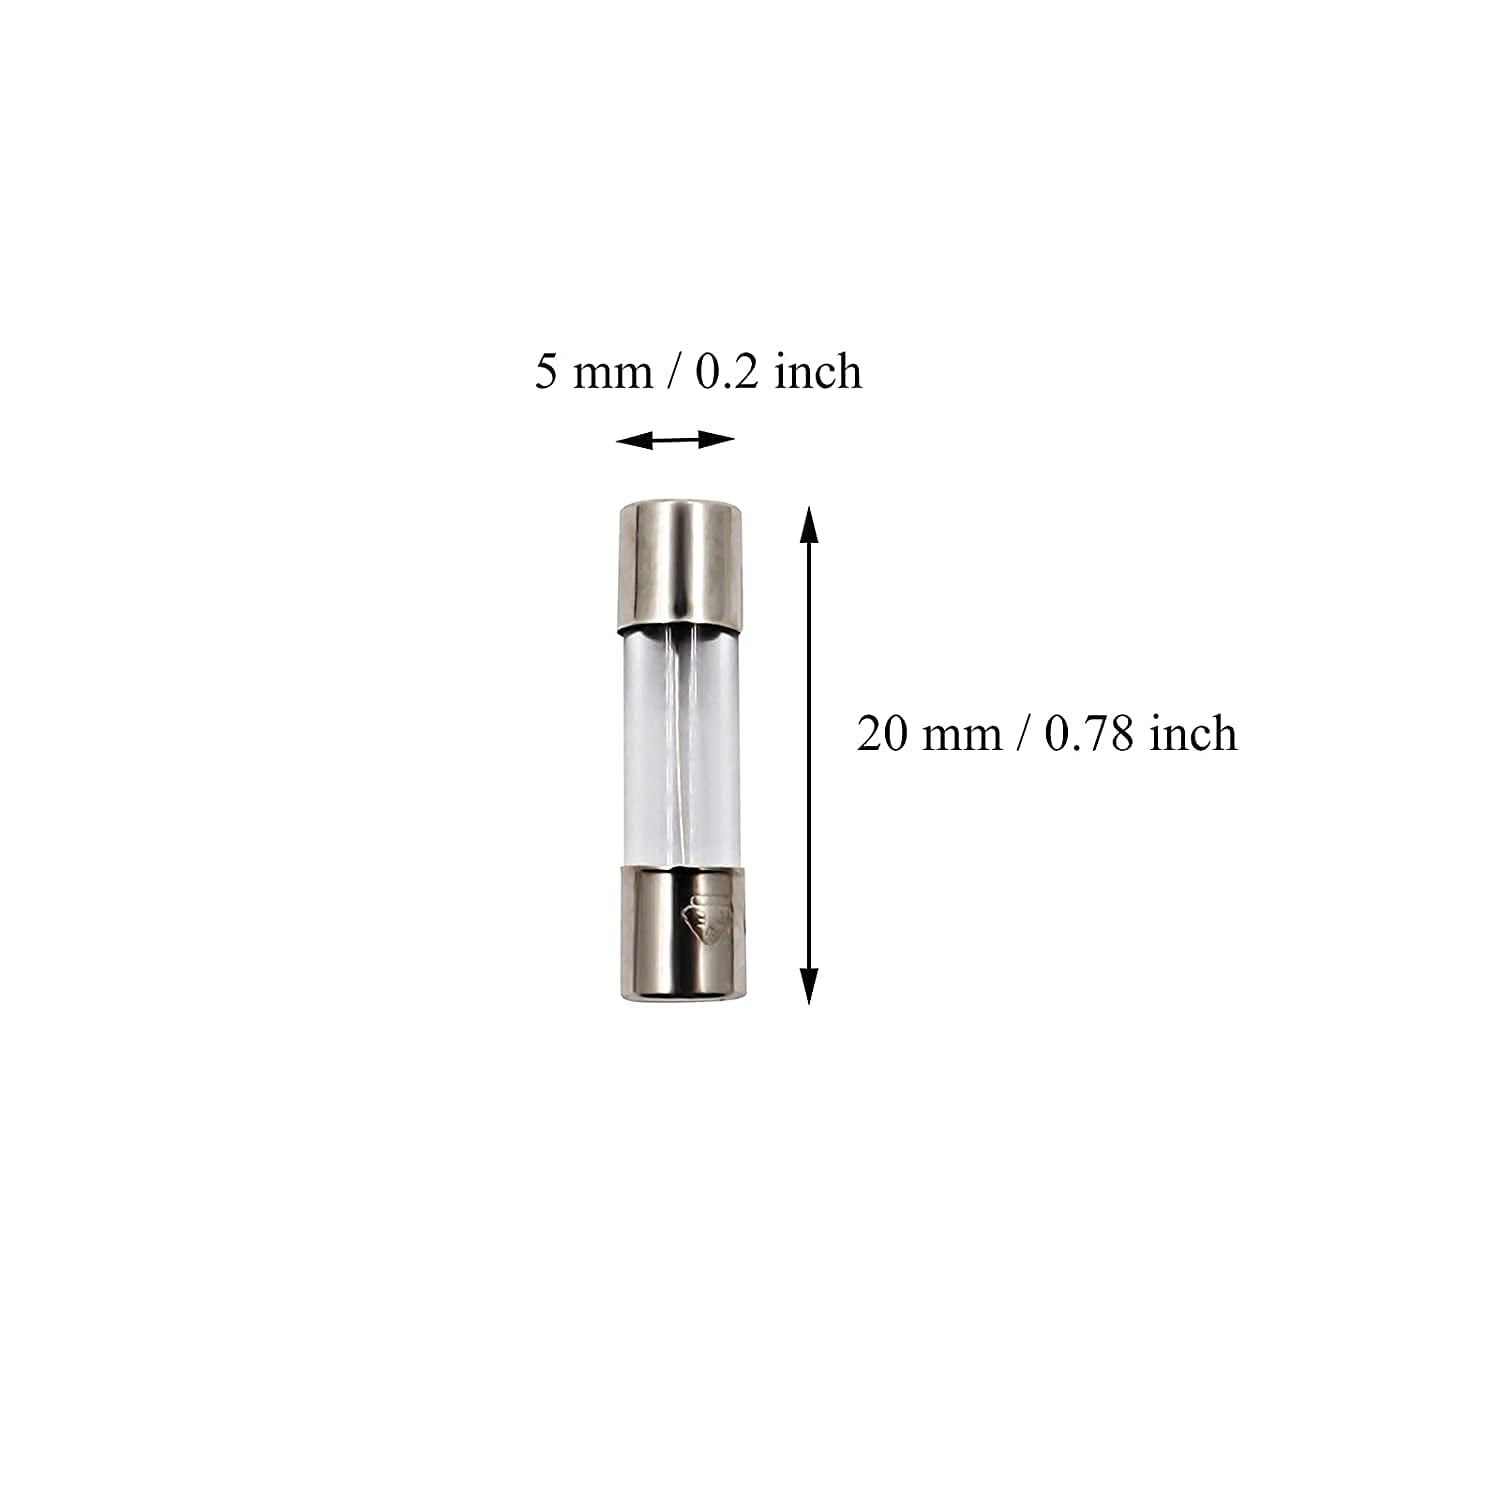 10 PACK Fast Blow 5mm x 20mm glass fuse 0.5A AMP -- 